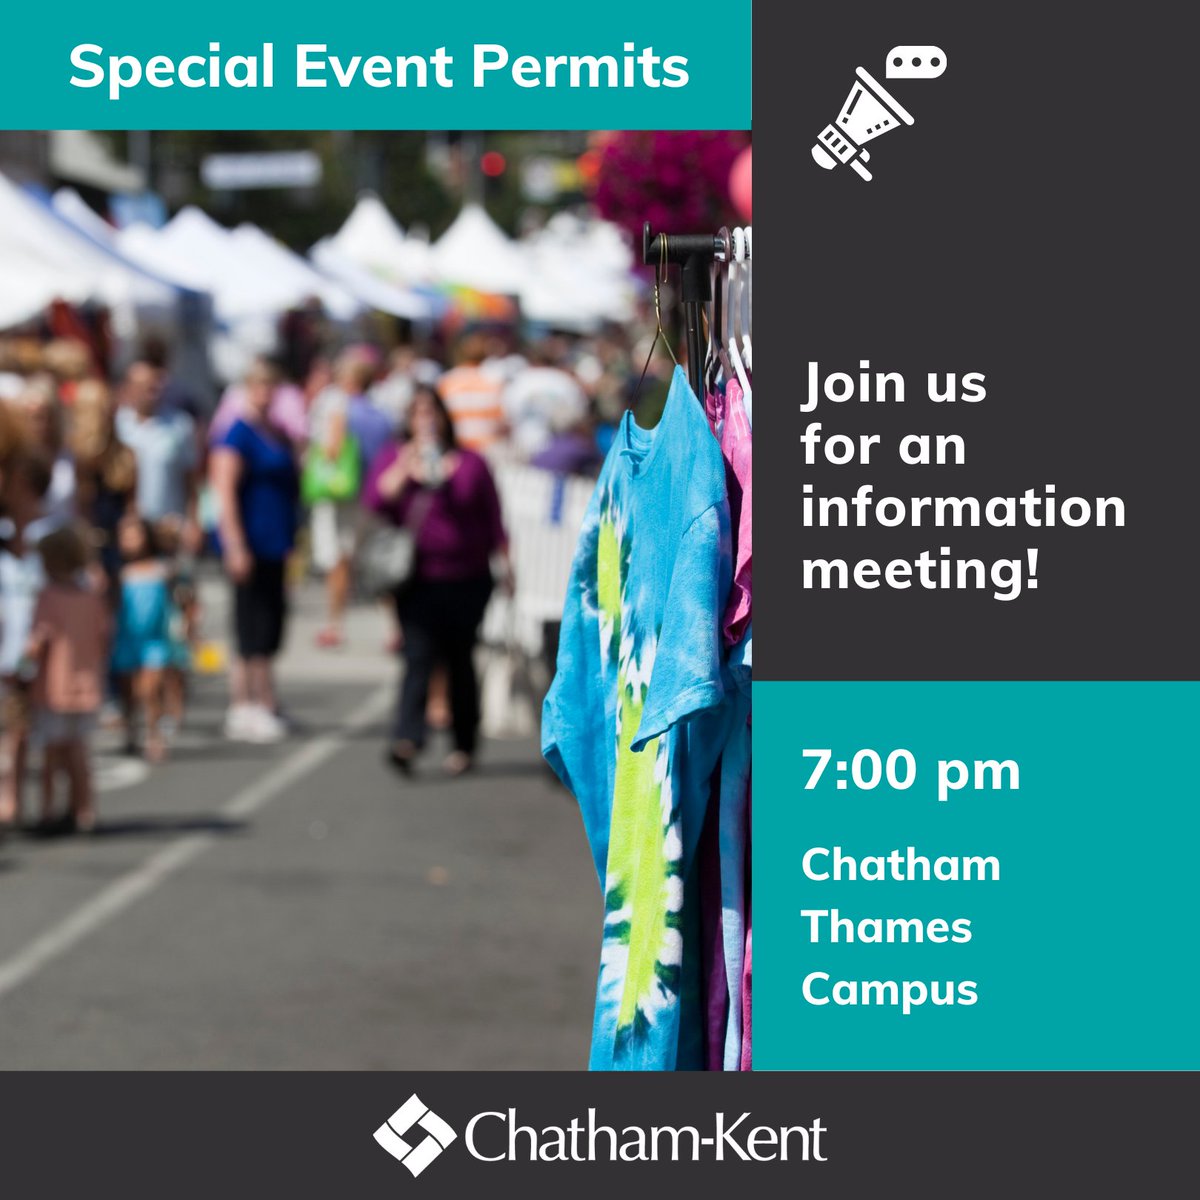 Applying for a Special Event Permit? Come out to one of our information nights and learn about the process... 👉Chatham Thames Campus - TONIGHT, 7:00 - 9:00 pm 👈 chatham-kent.ca/localgovernmen…. #ckont